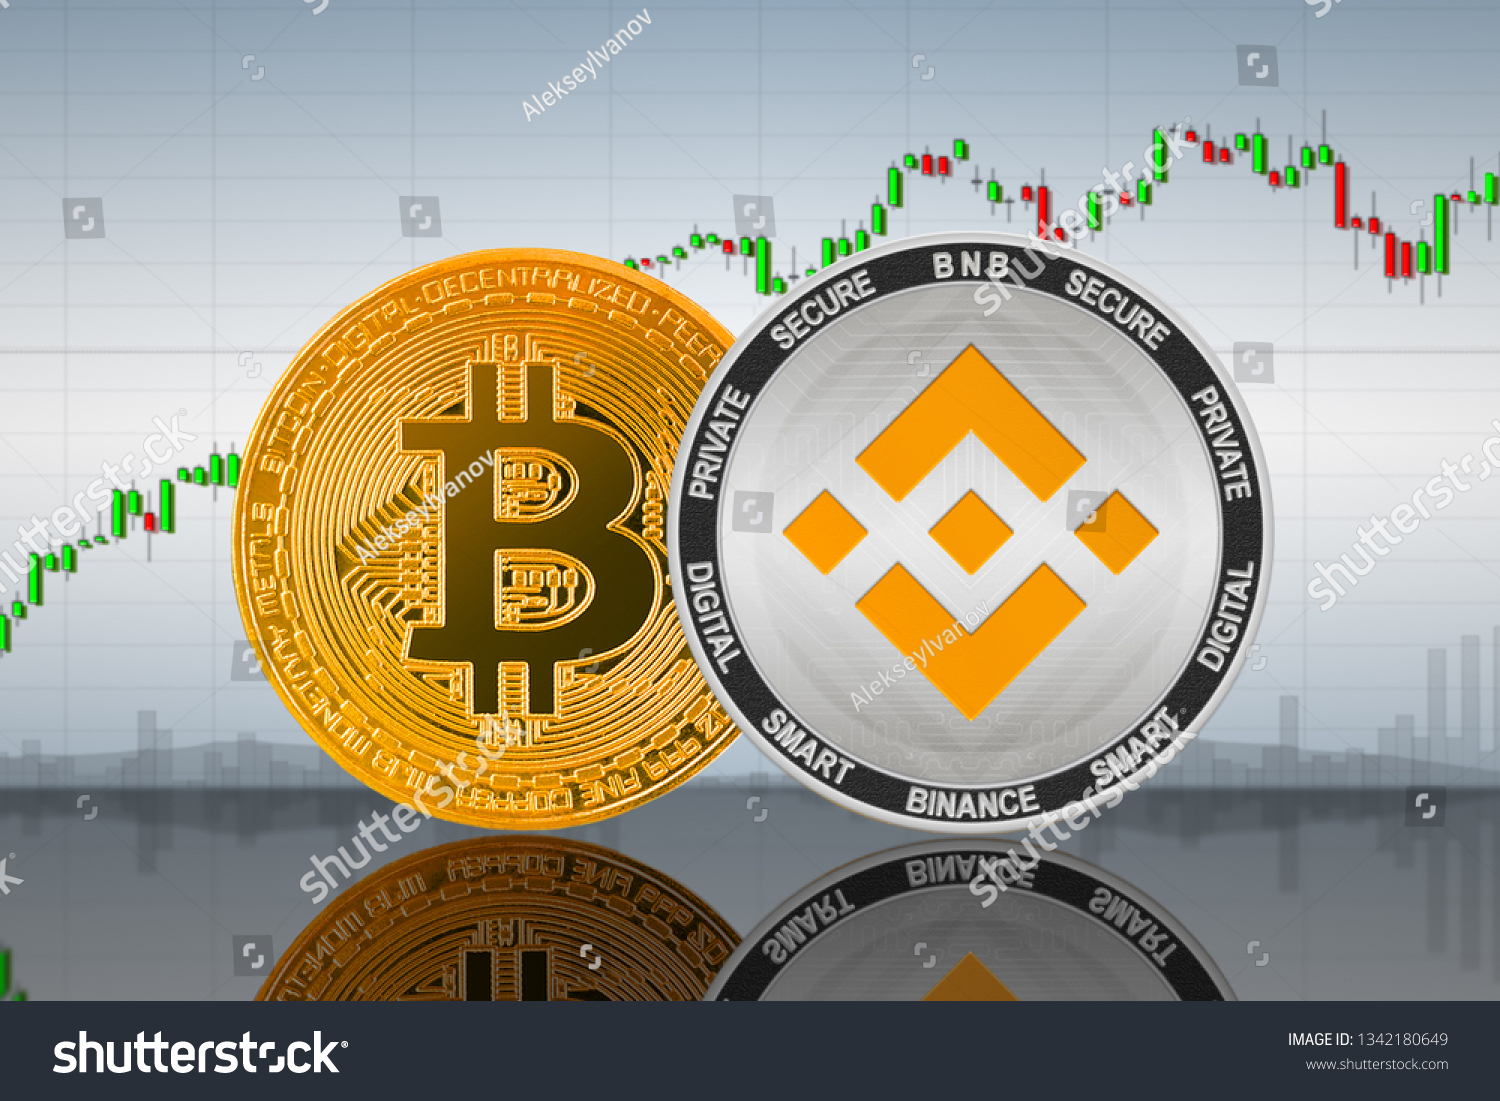 Bnb btc where to buy with bitcoin